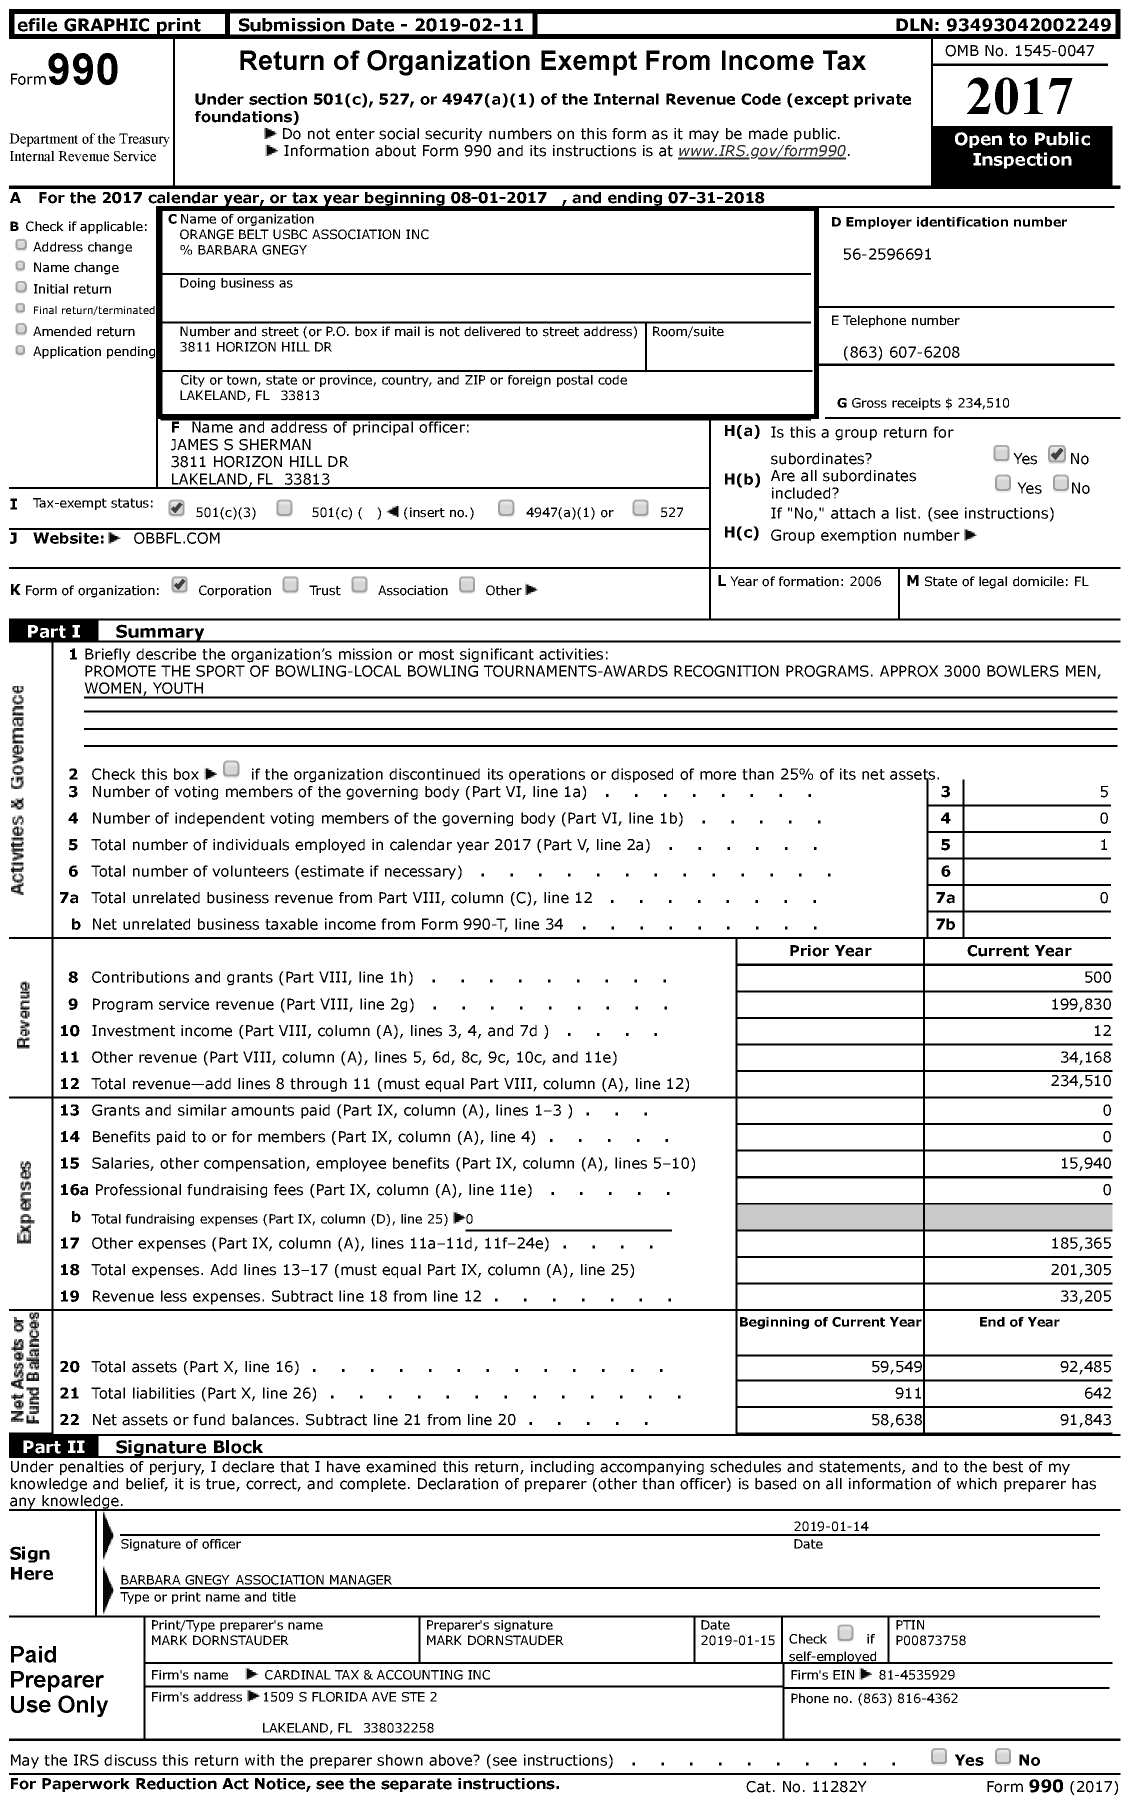 Image of first page of 2017 Form 990 for United States Bowling Congress - 82109 Orange Belt Usbc